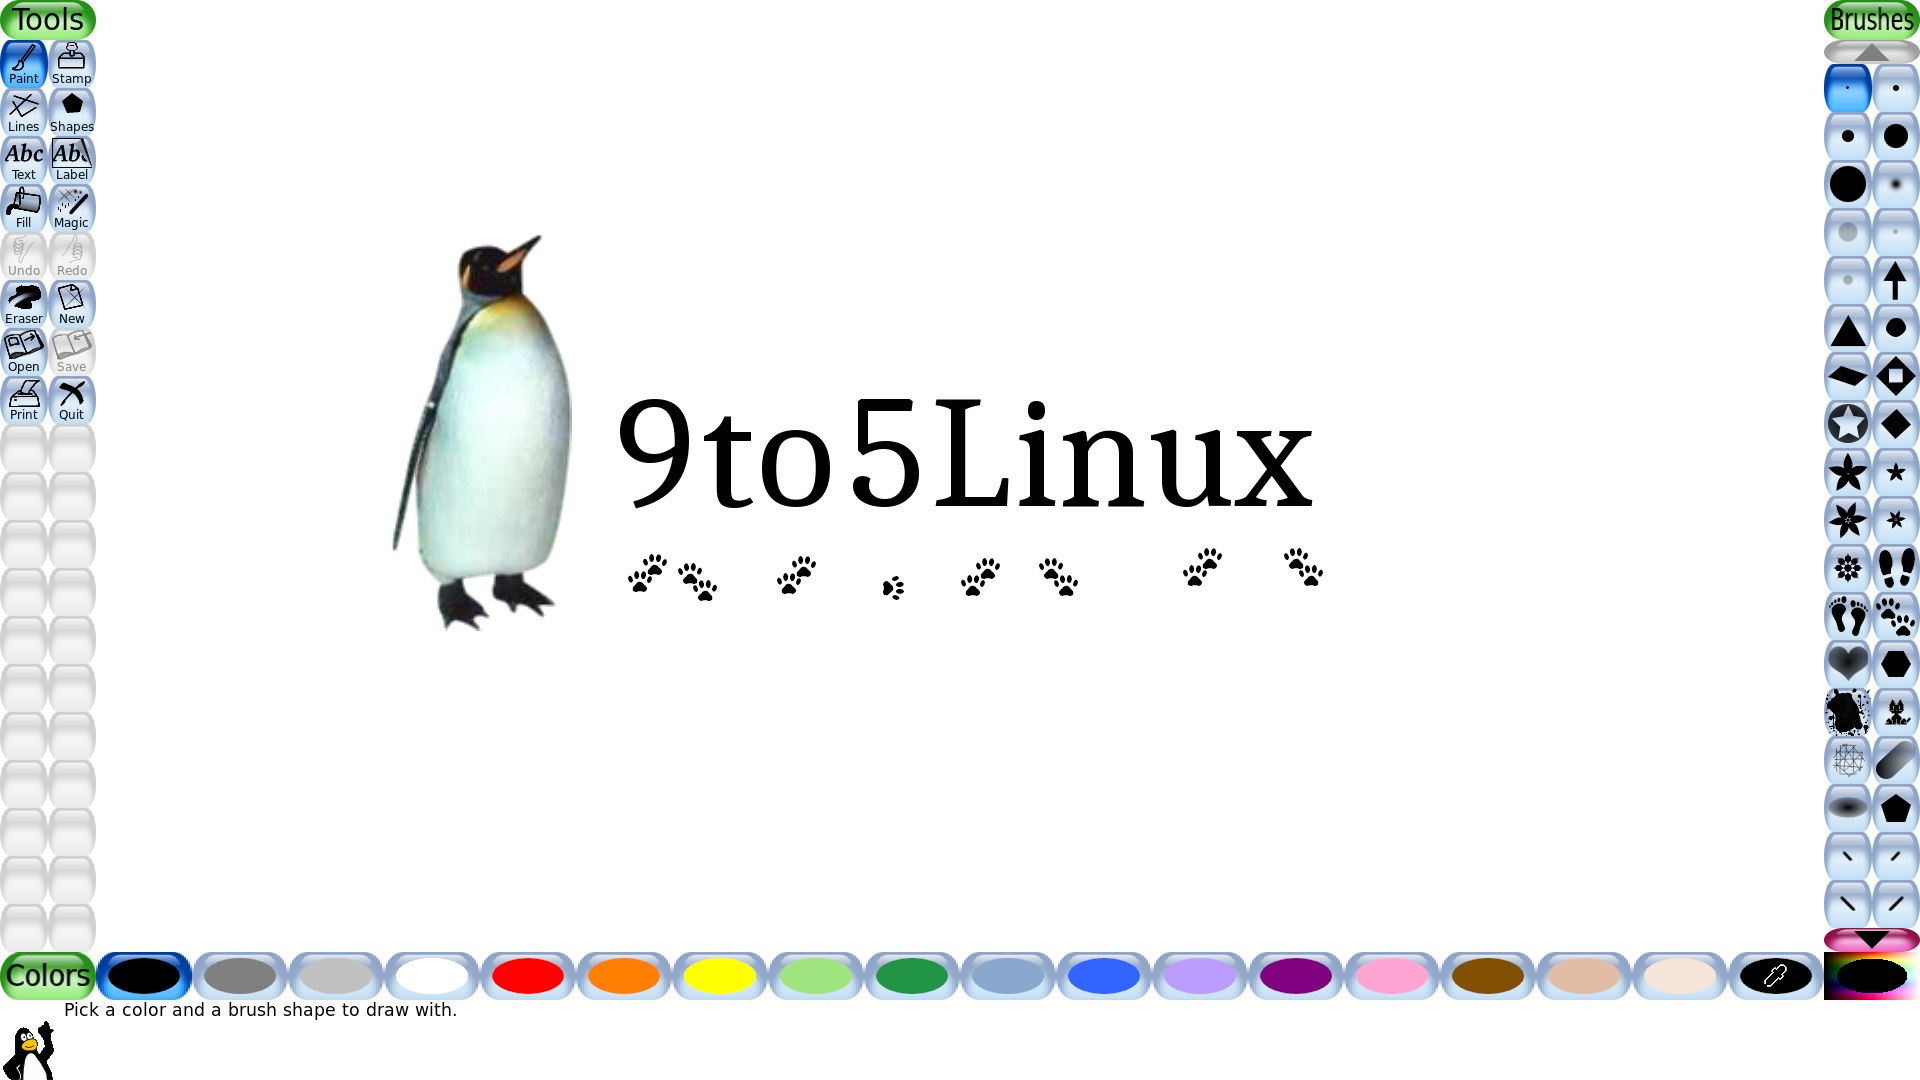 Tux Paint 0.9.26 Open-Source Drawing Software for Children Released with New Magic Tools